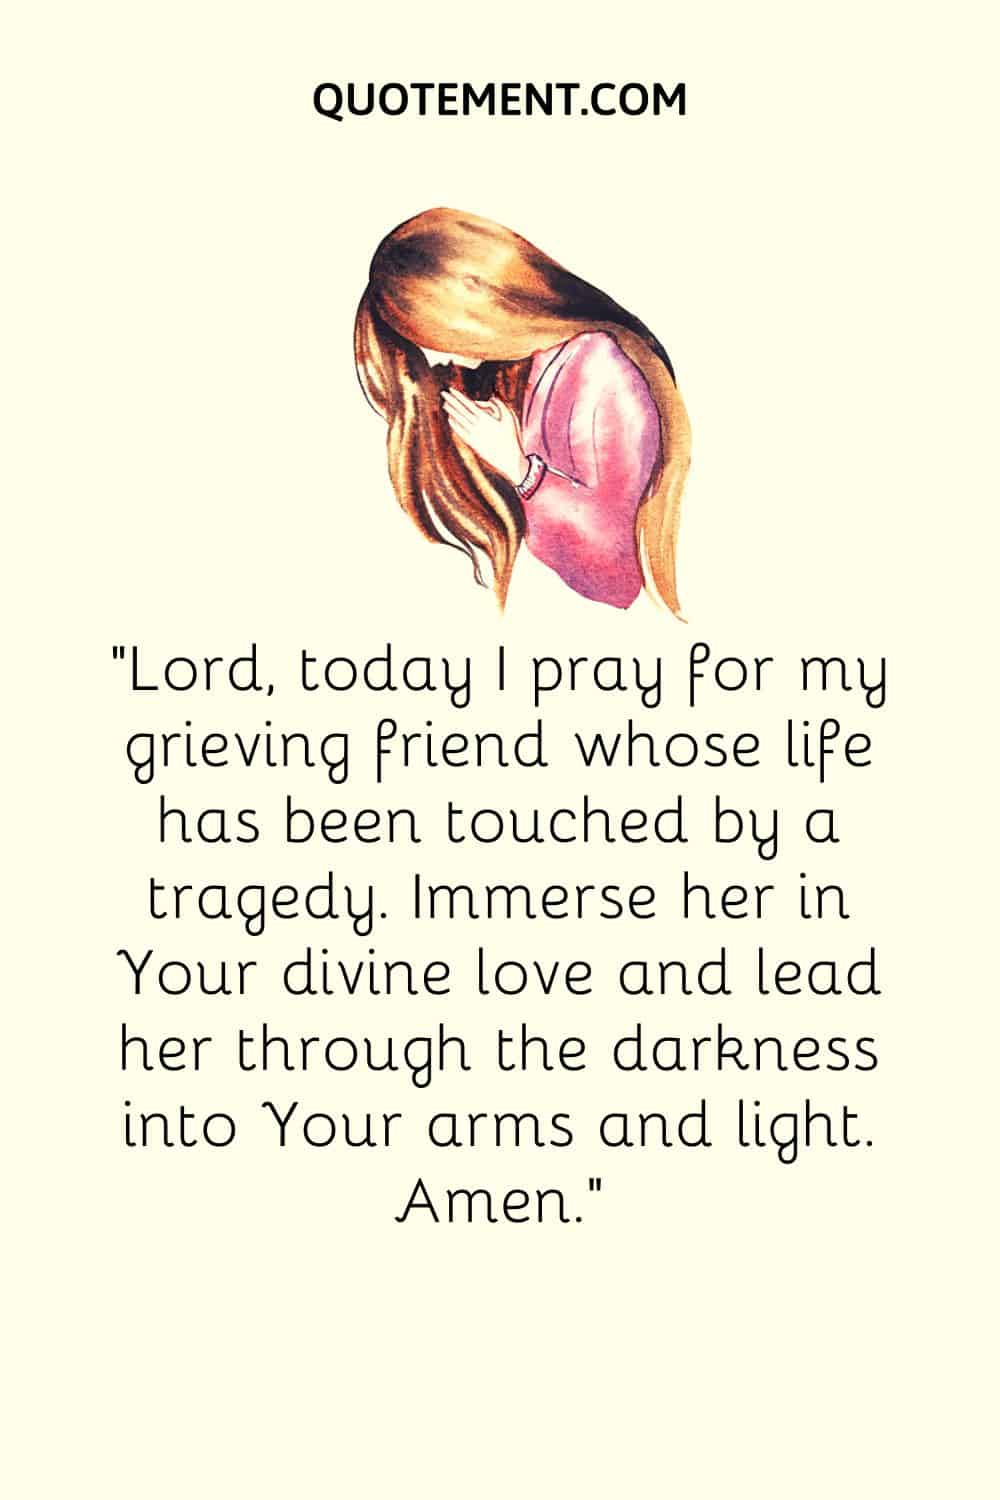 Lord, today I pray for my grieving friend whose life has been touched by a tragedy